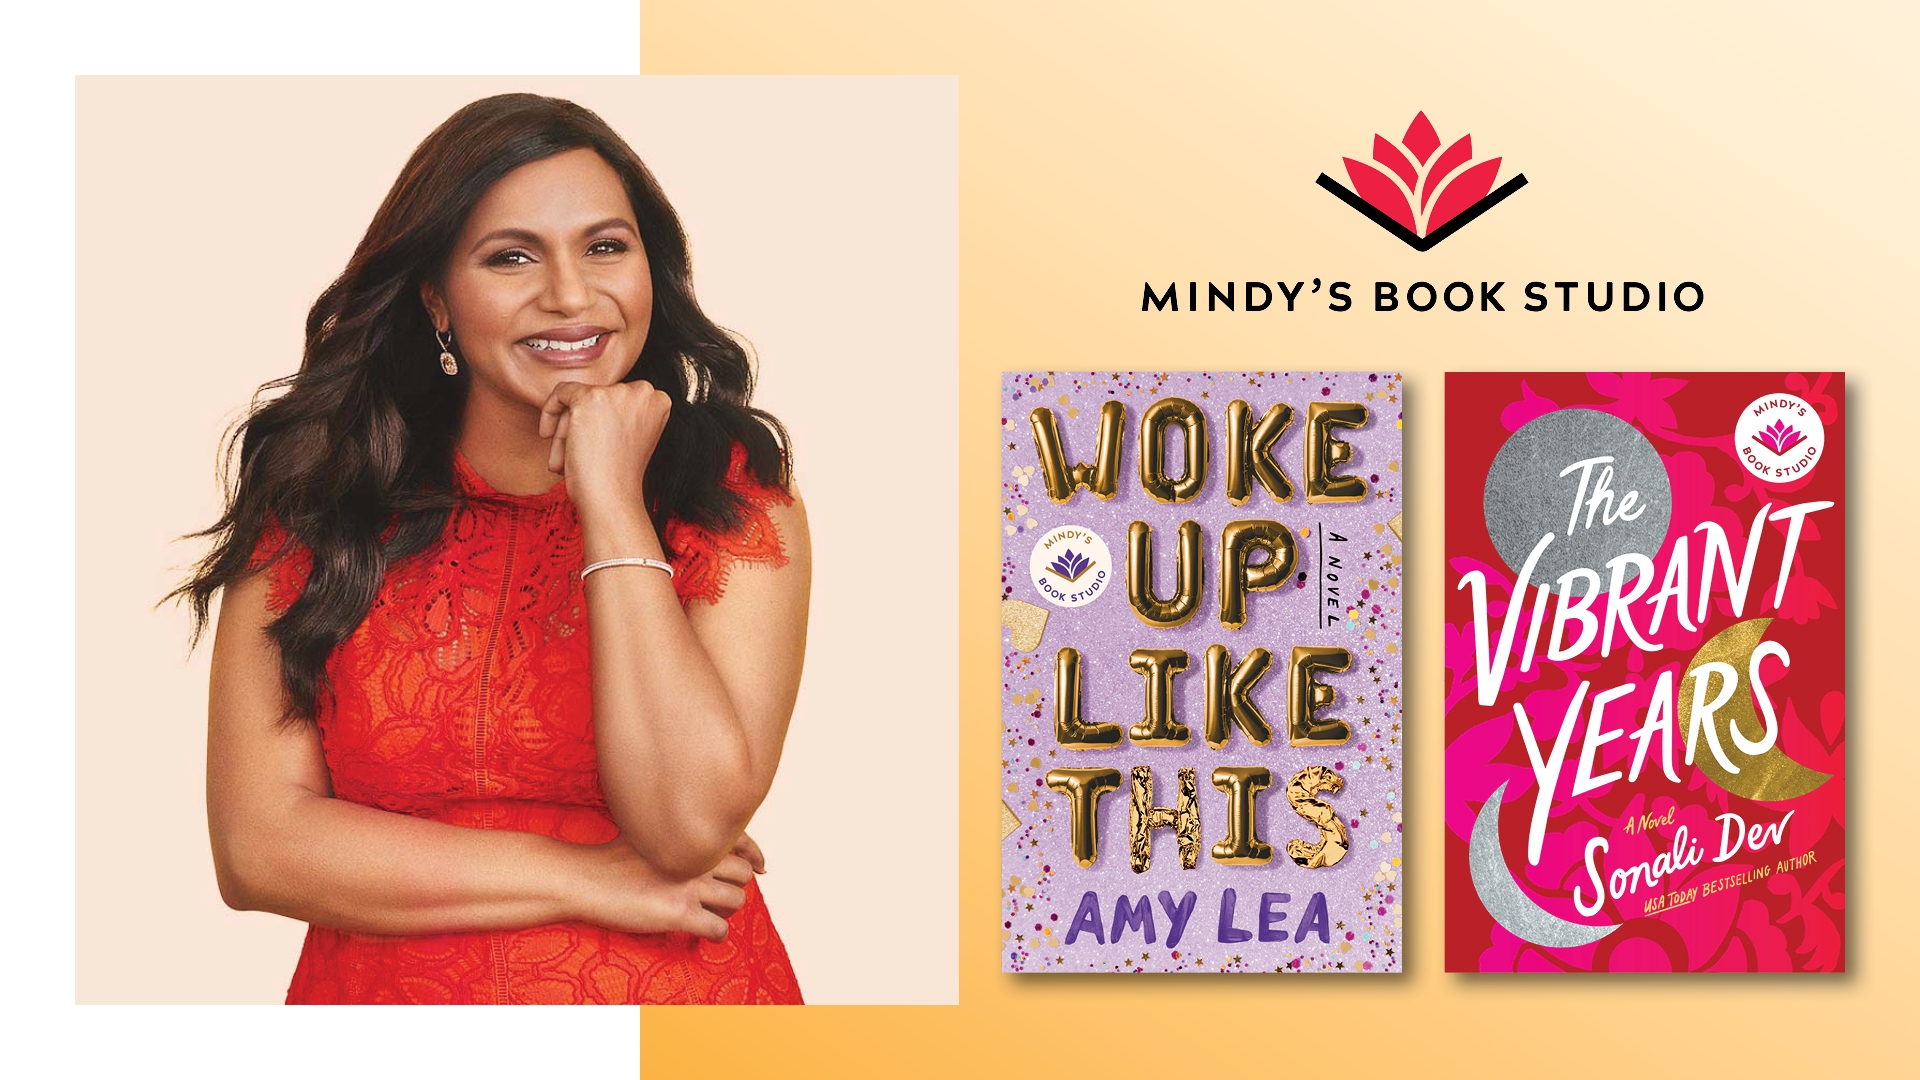 A photo of Mindy Kaling next to the "Mindy's Book Studio" logo, and two book covers, "Woke Up Like This" and "The Vibrant Years"